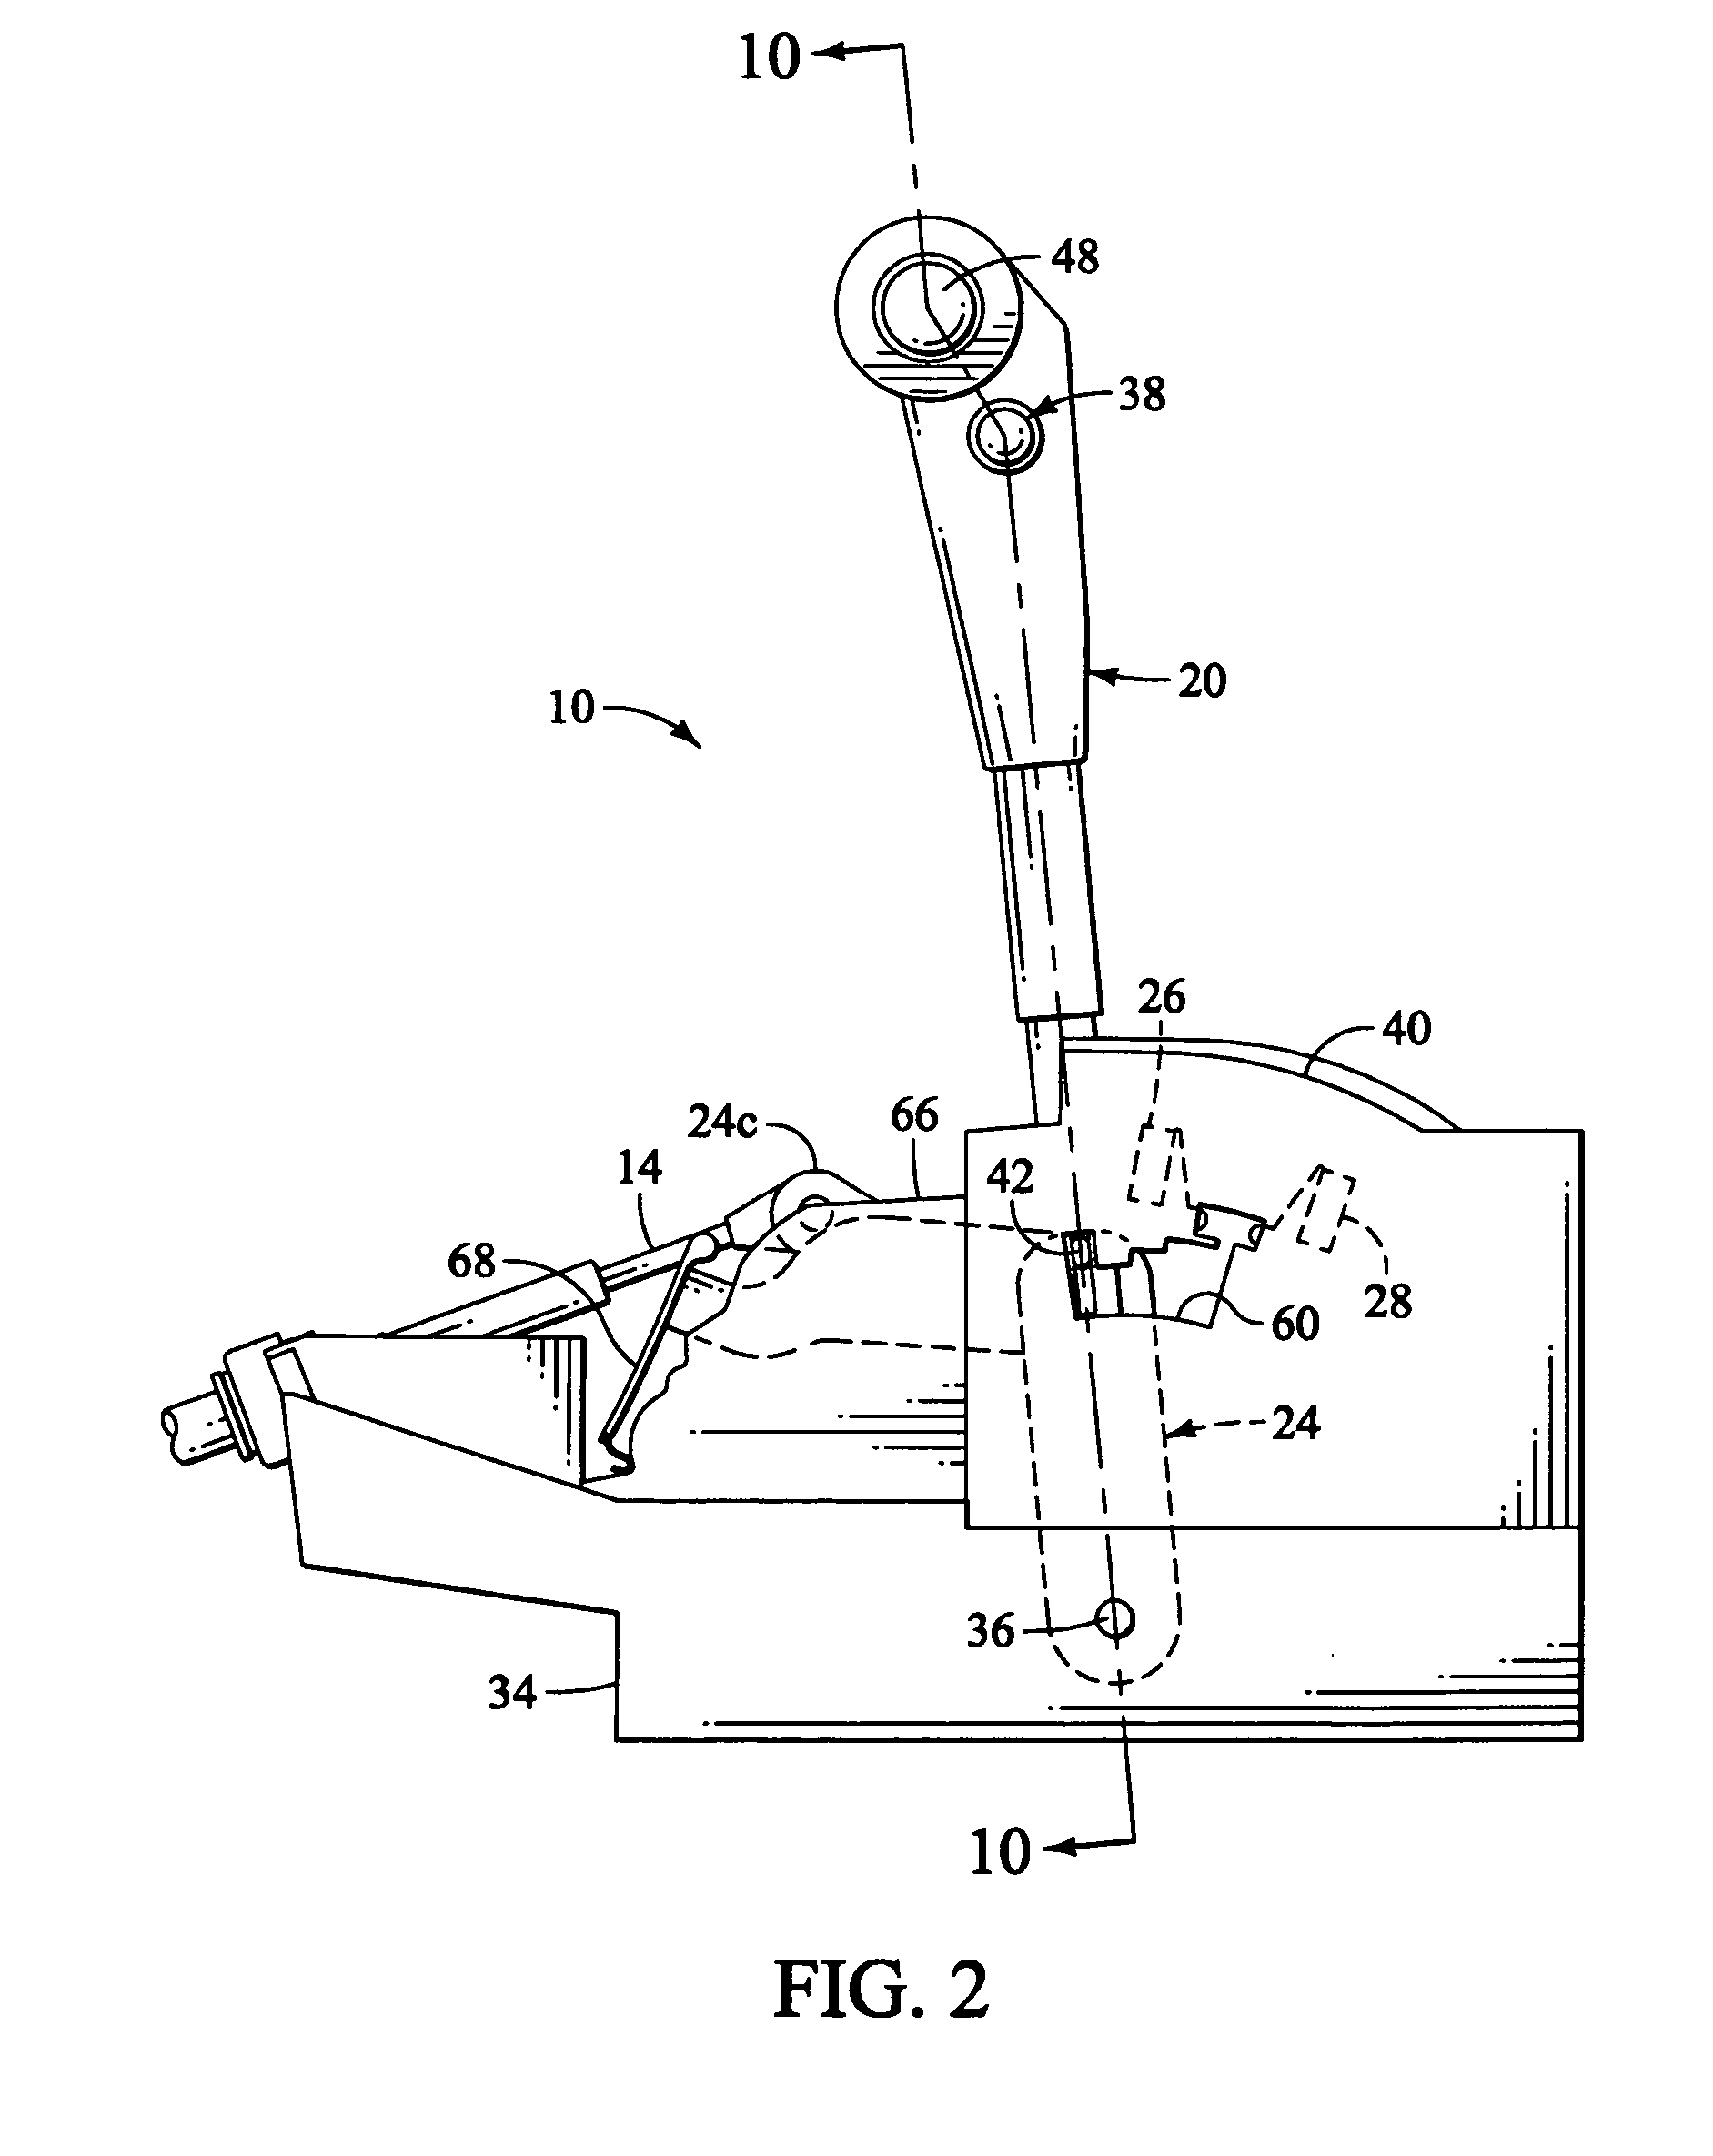 Inline automatic/manual shifter